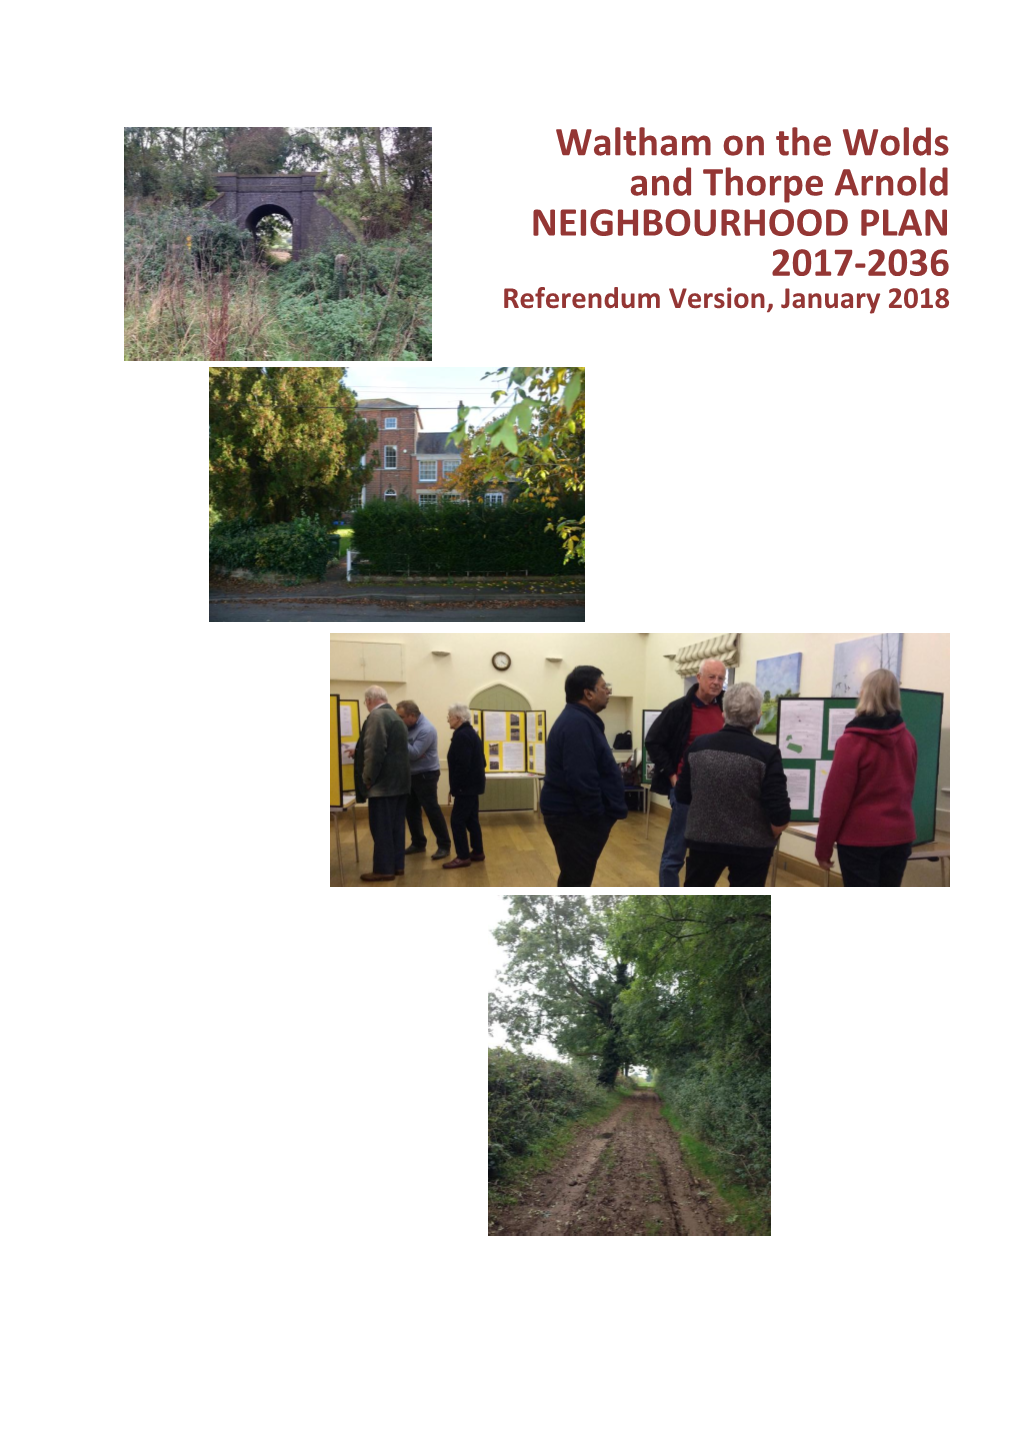 PPG10 Waltham on the Wolds and Thorpe Arnold Neighbourhood Plan